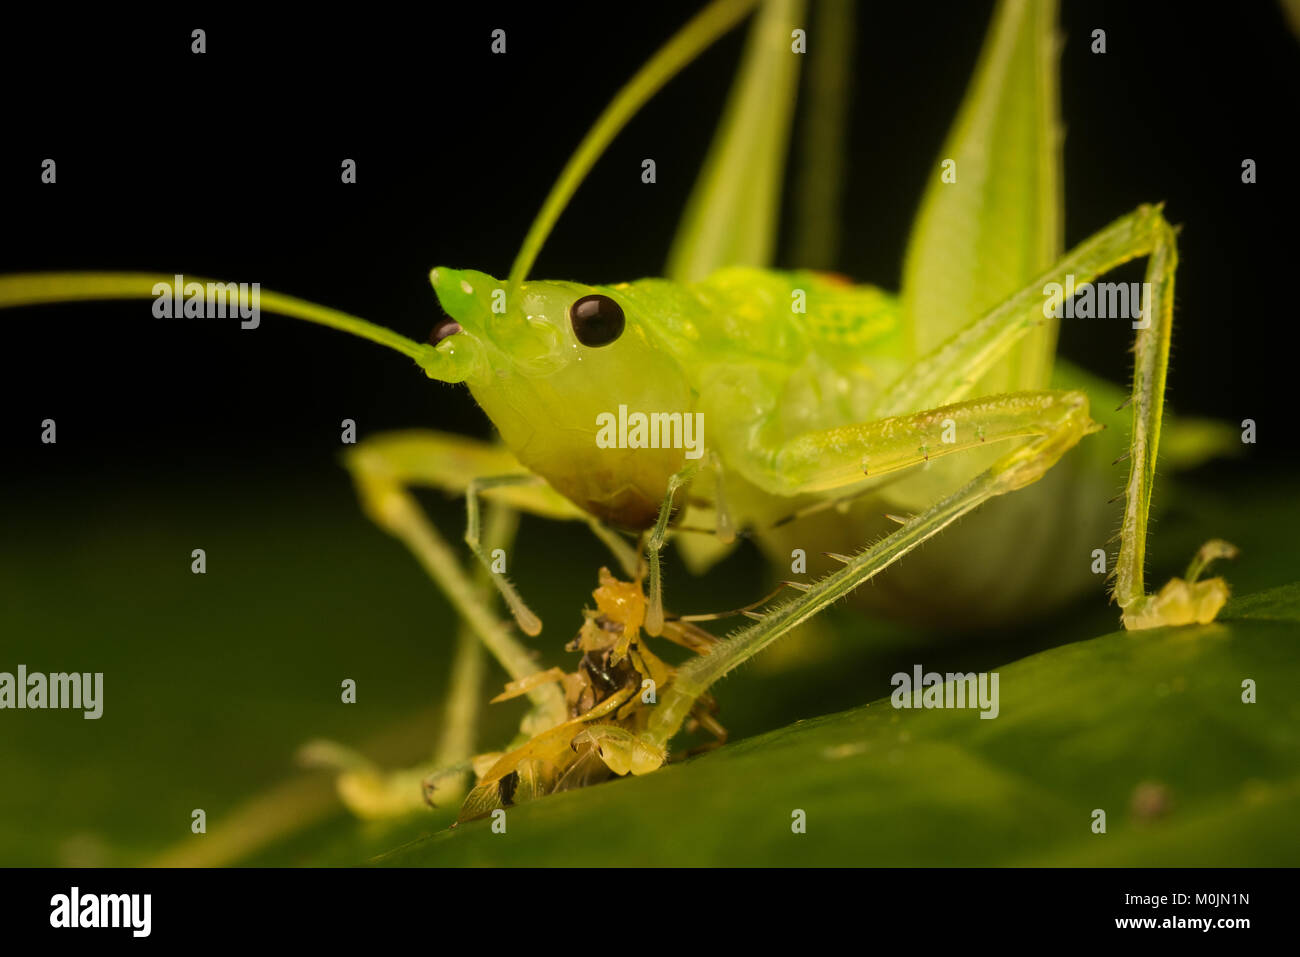 A coneheaded katydid consuming a prey item, a smaller insect that was not fast enough to escape. Stock Photo